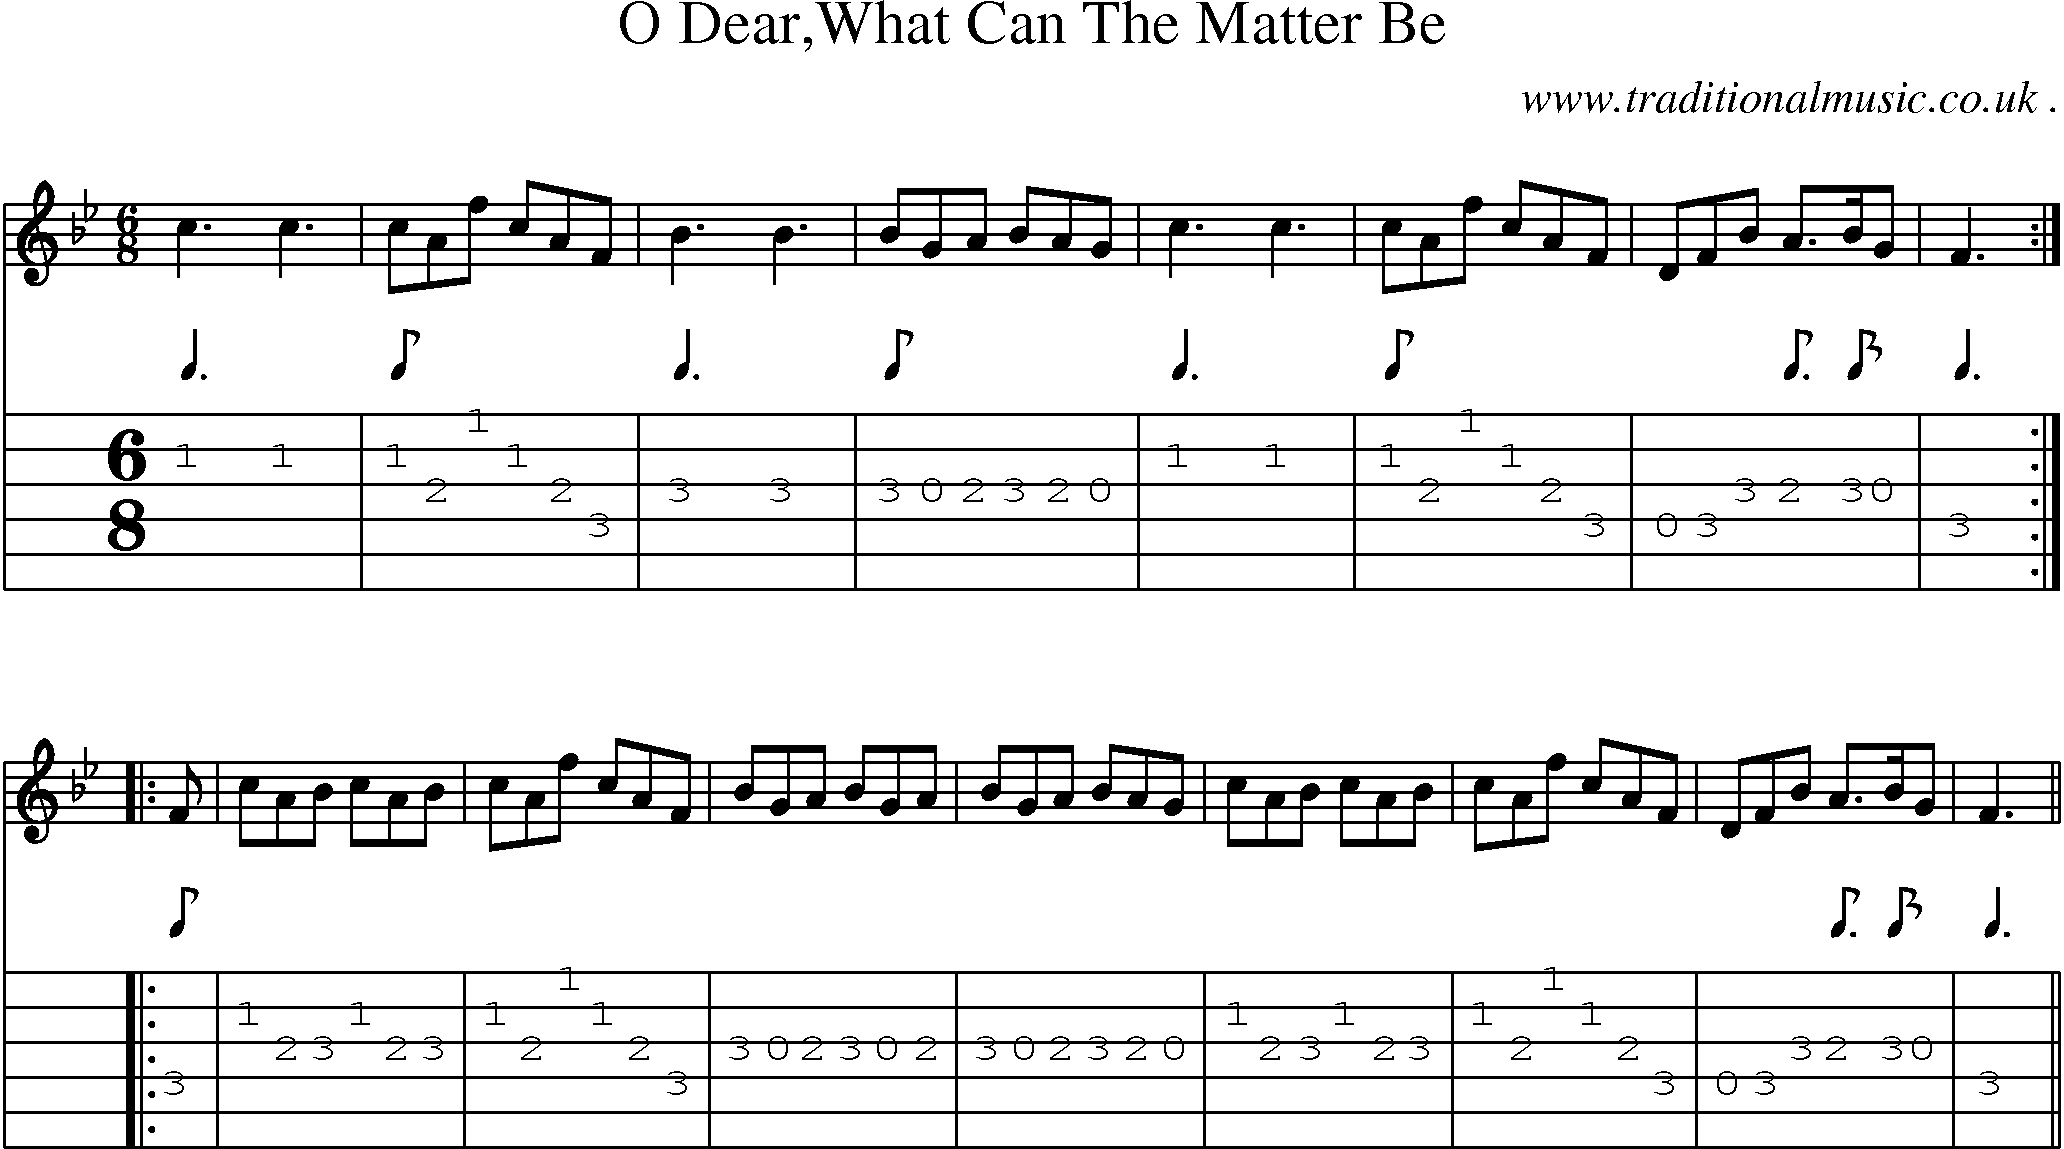 Sheet-Music and Guitar Tabs for O Dearwhat Can The Matter Be